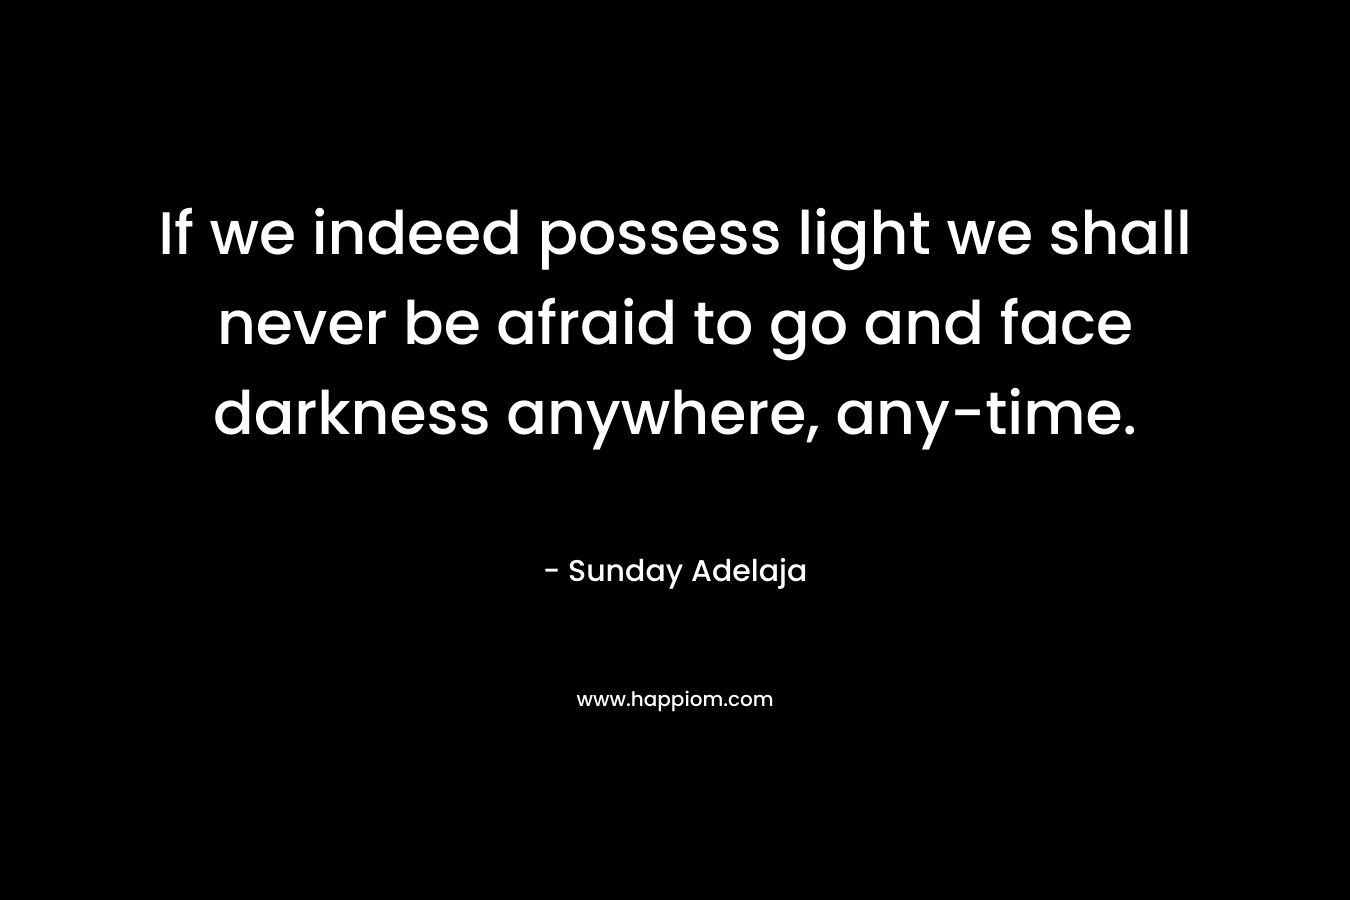 If we indeed possess light we shall never be afraid to go and face darkness anywhere, any-time.